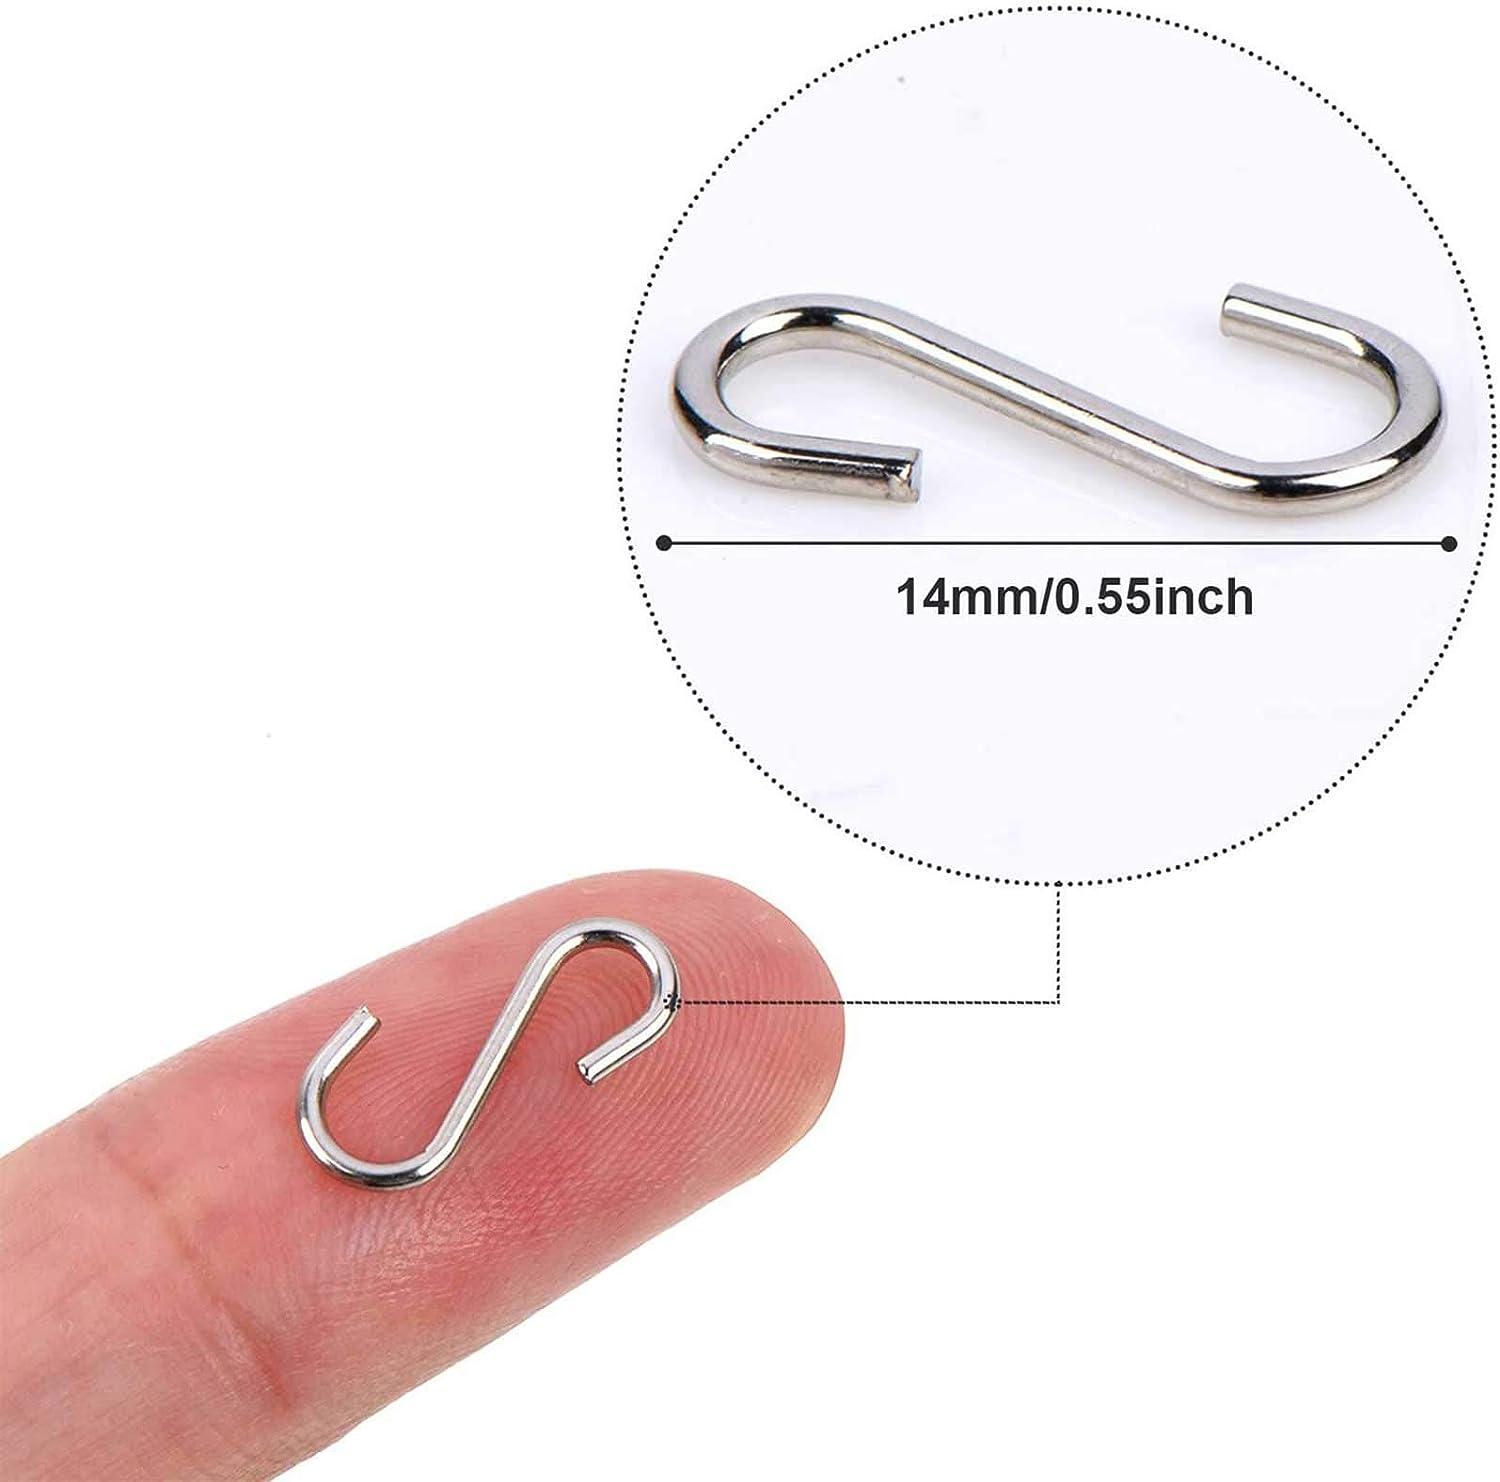 Mini S Hooks Connectors S Shaped Wire Hook Hangers 200pcs Hanging Hooks for  DIY Crafts, Hanging Jewelry, Key Chain, Tags, Fishing Lure, Net Equipment